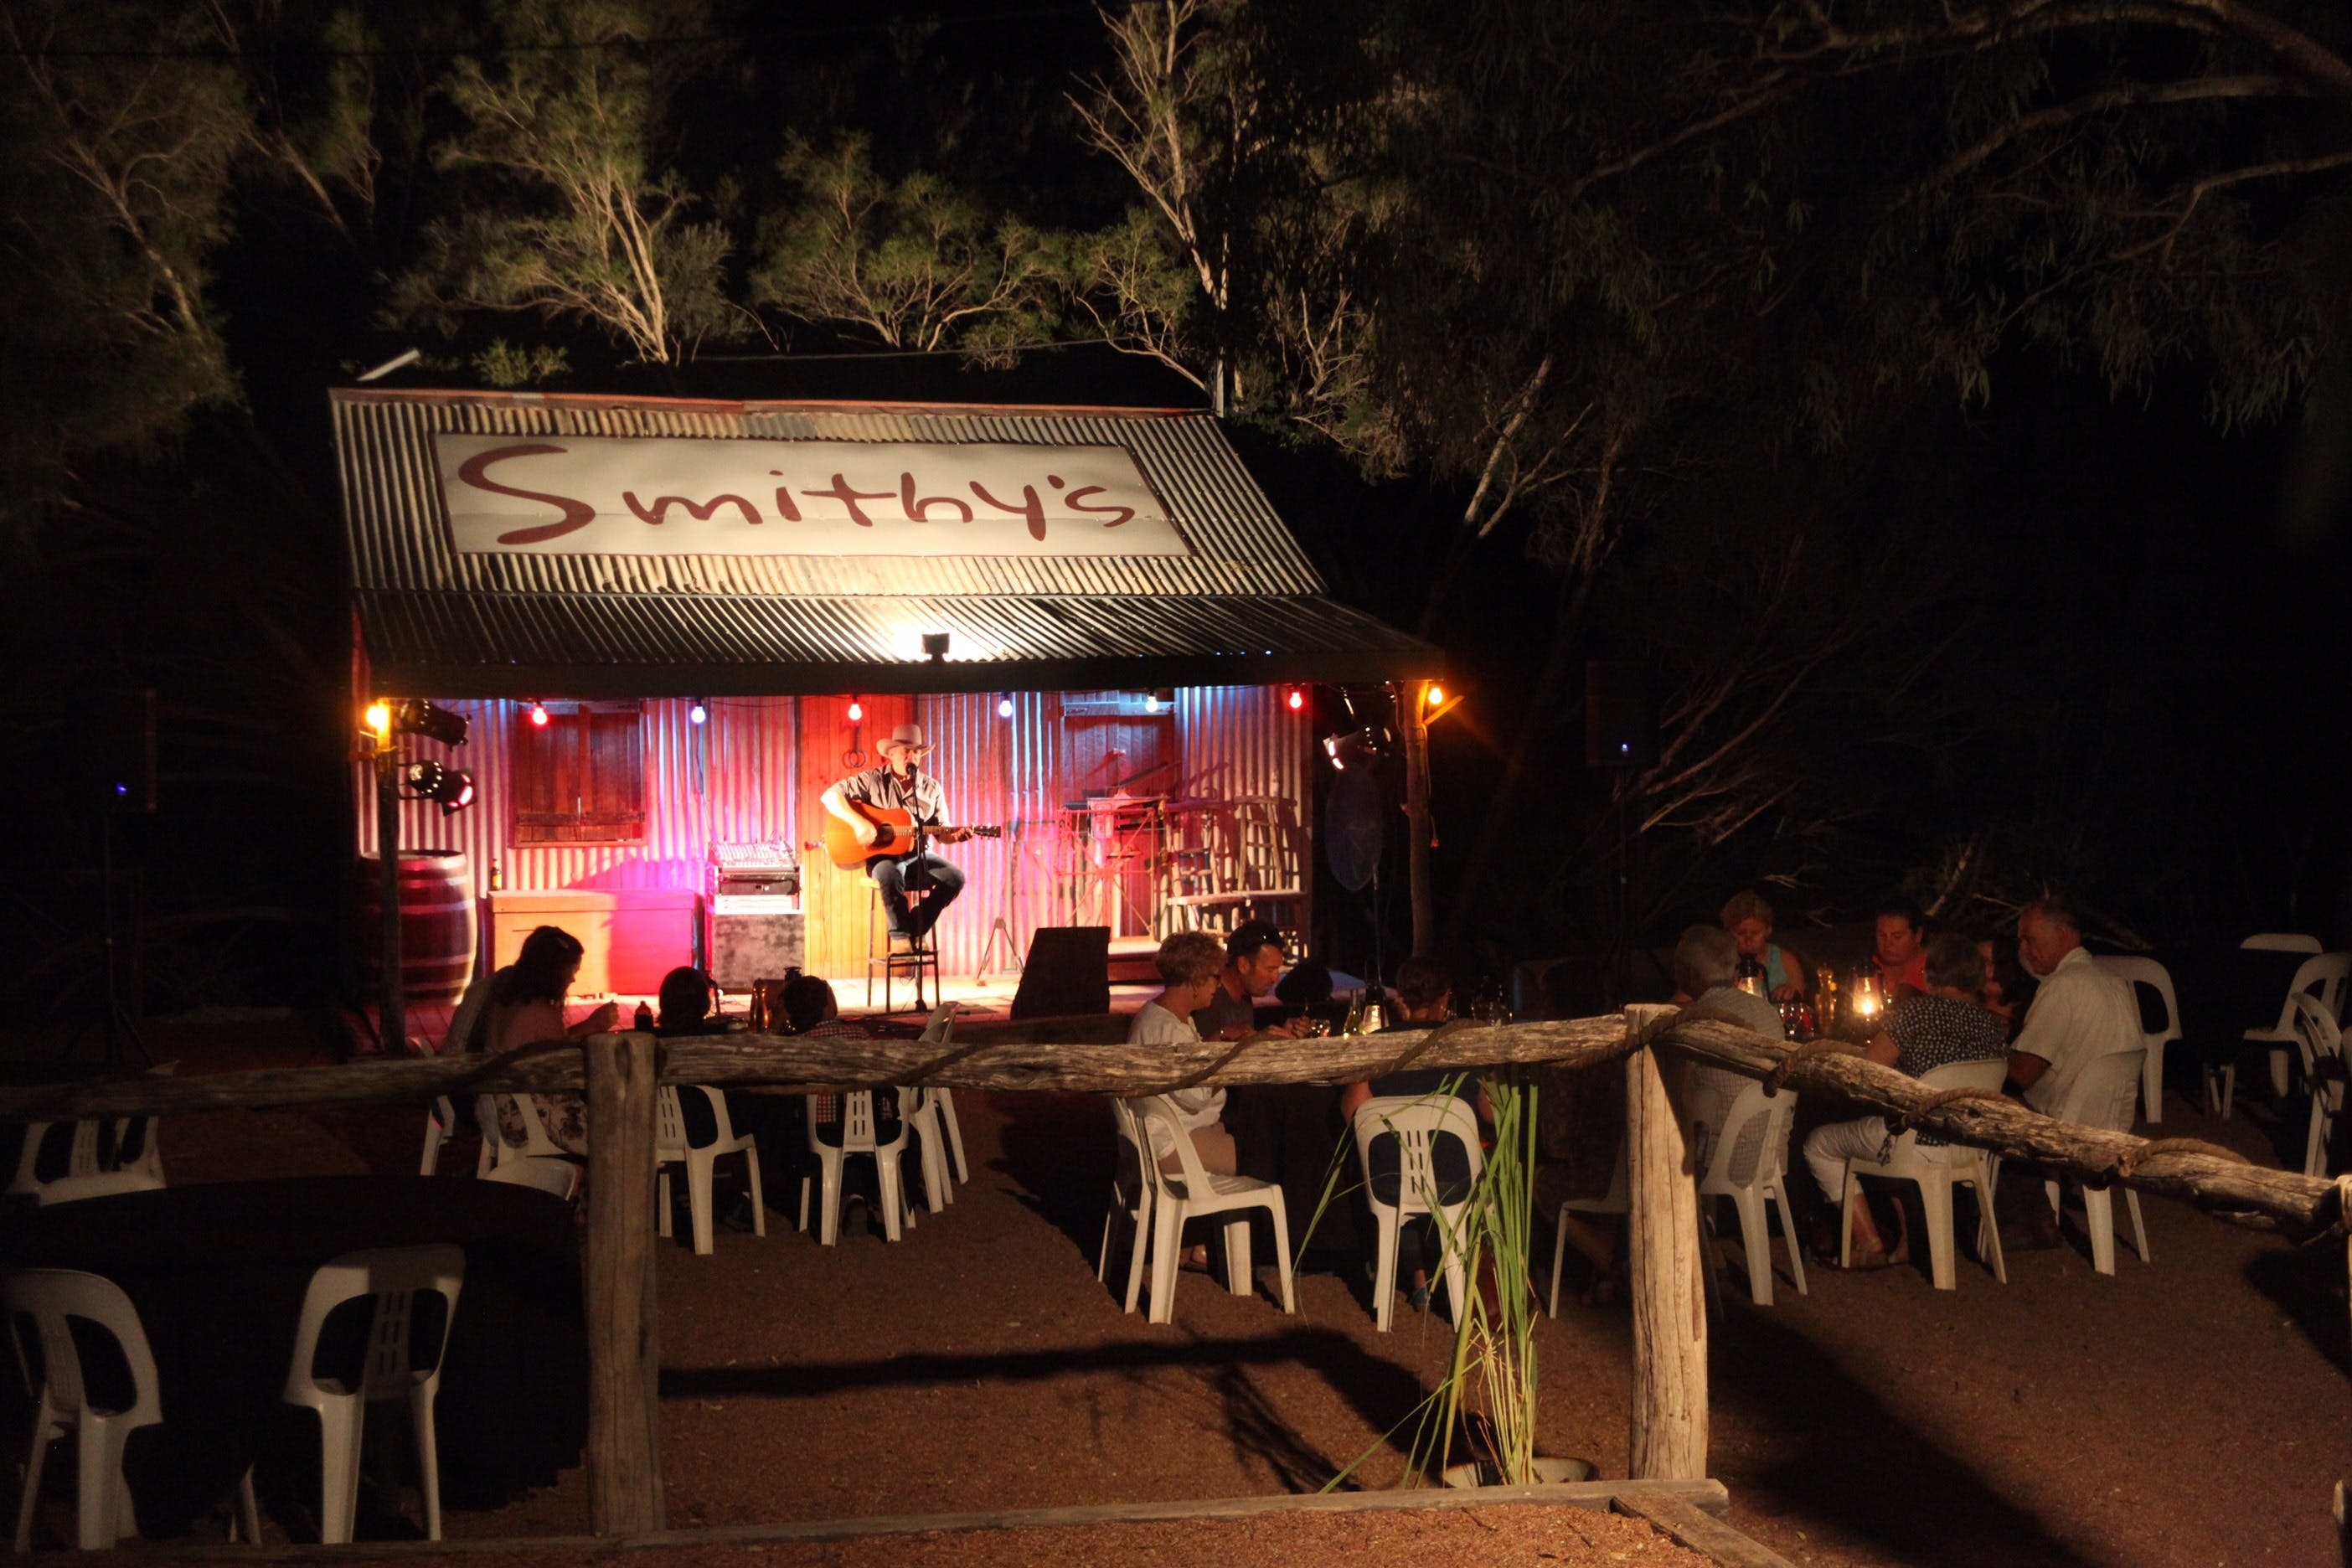 Smithy's Outback Dinner and Show - Broome Tourism